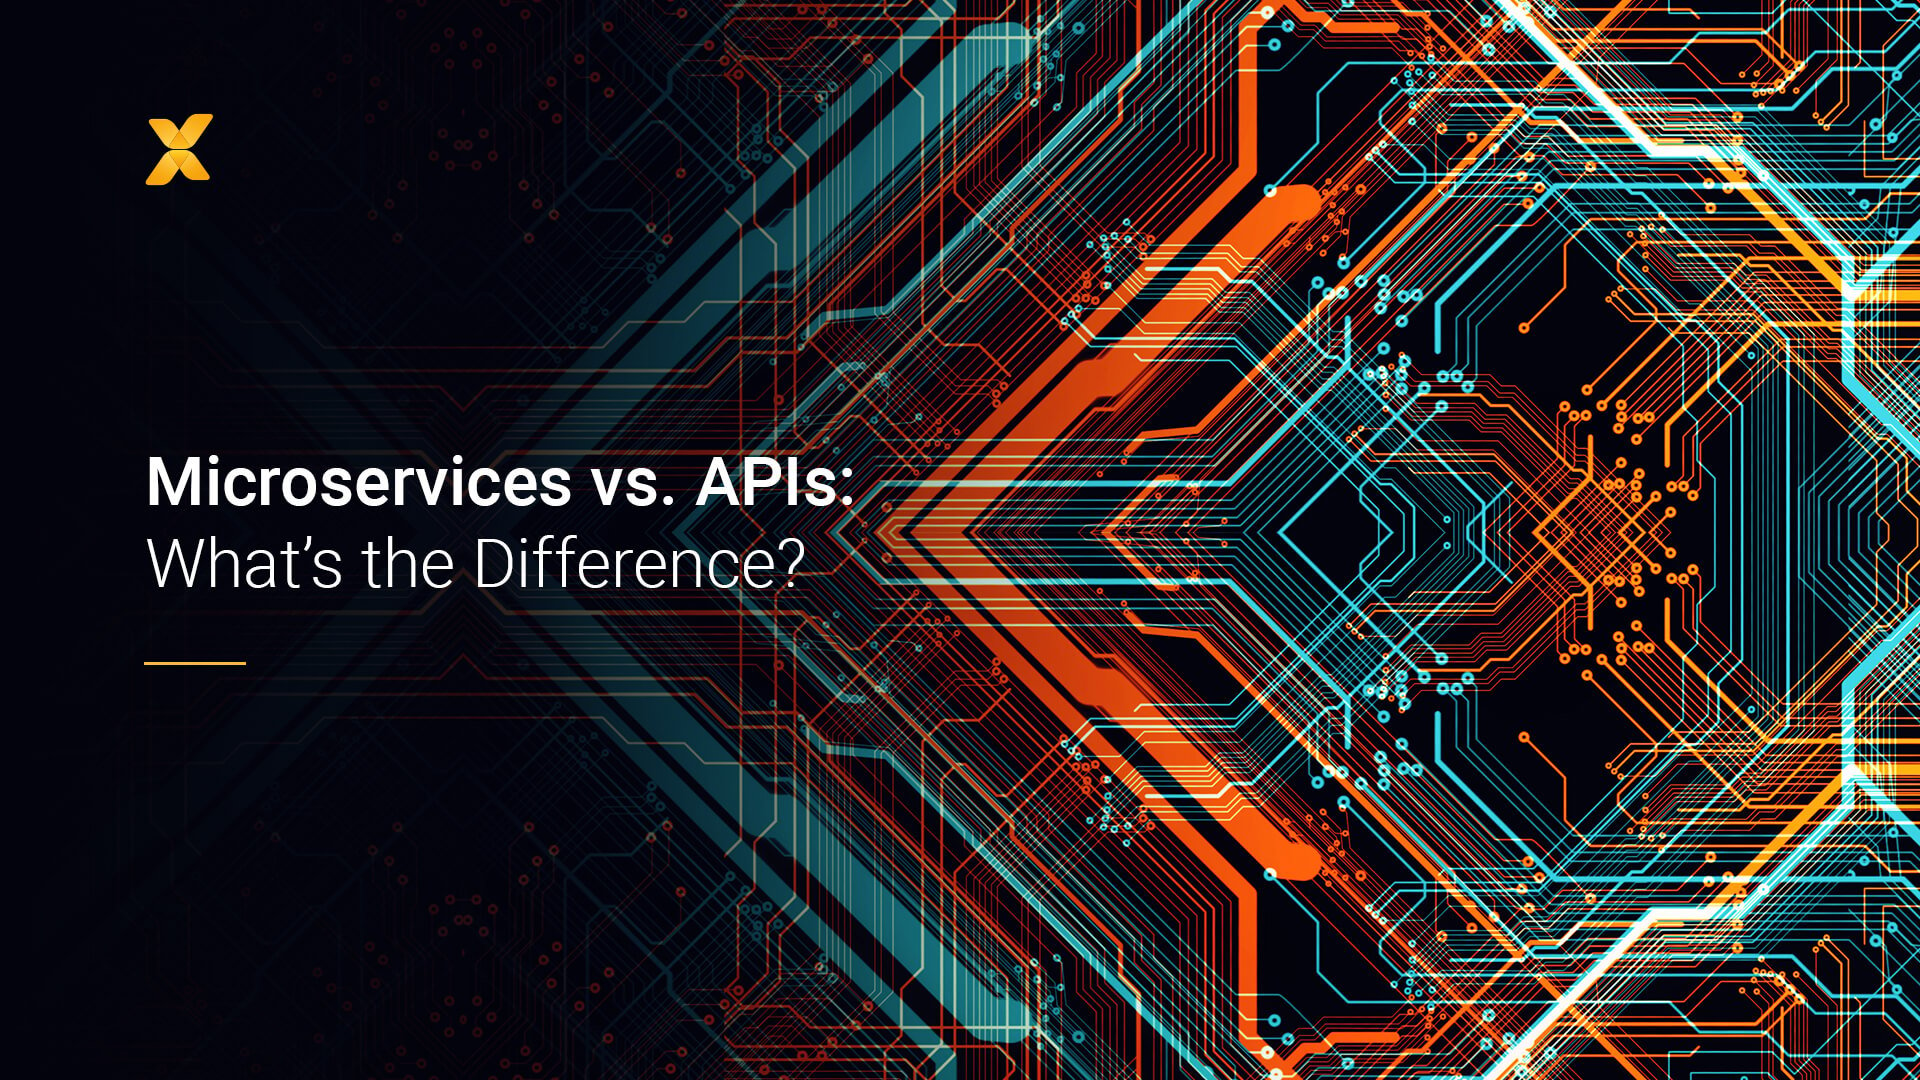 Vaimo's abstract image displays the text "Microservices vs. APIs: What's the Difference?"